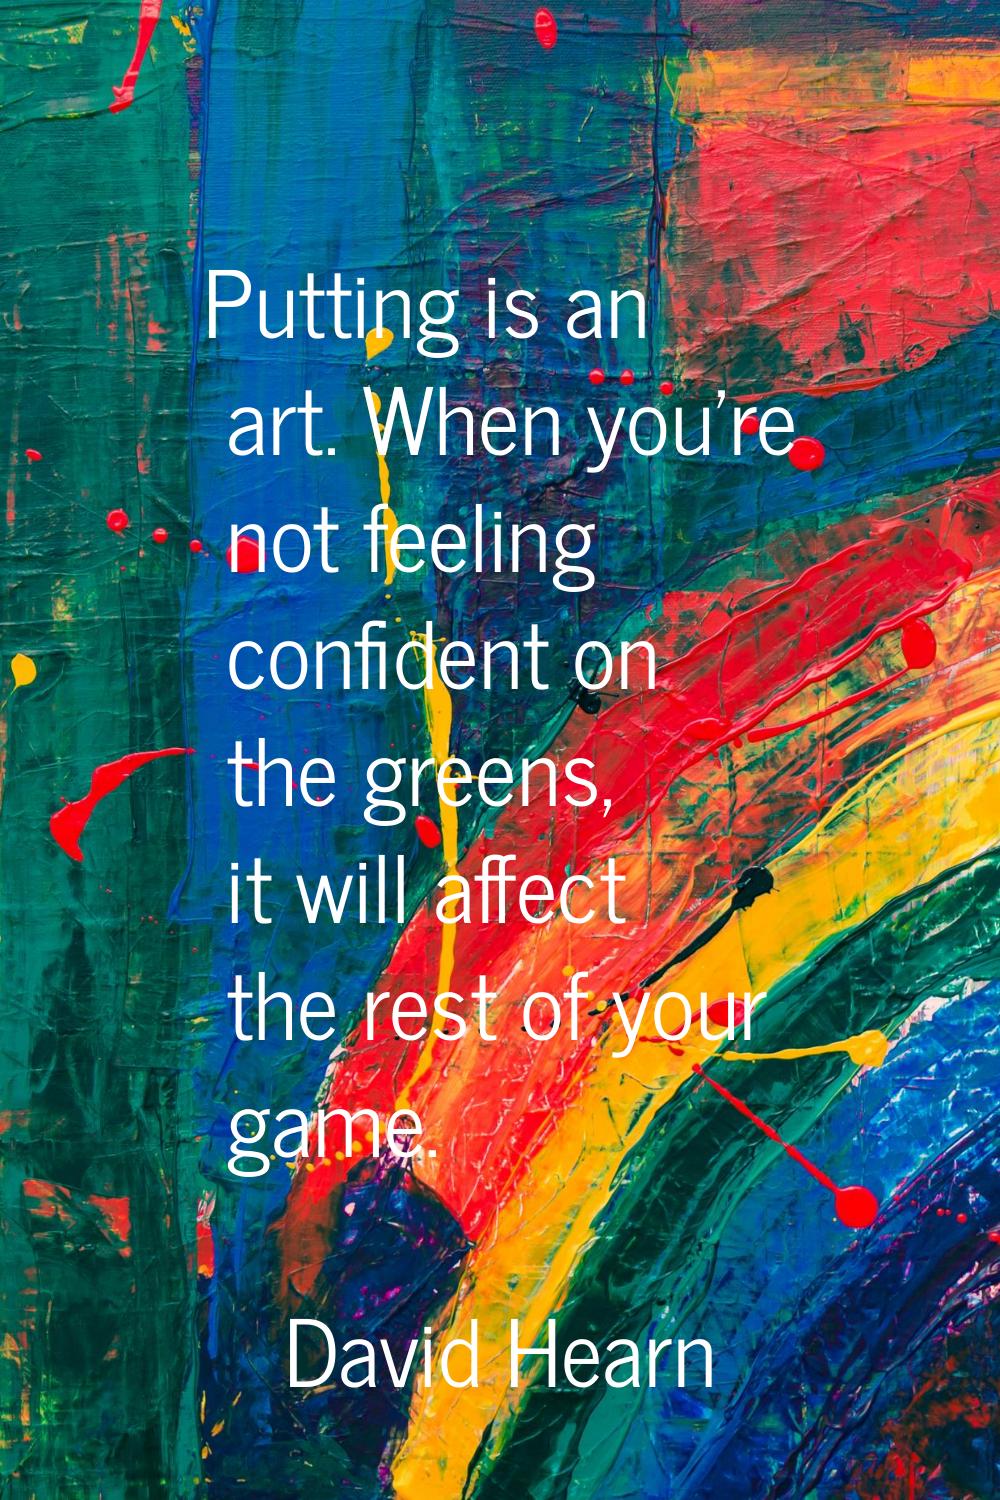 Putting is an art. When you're not feeling confident on the greens, it will affect the rest of your